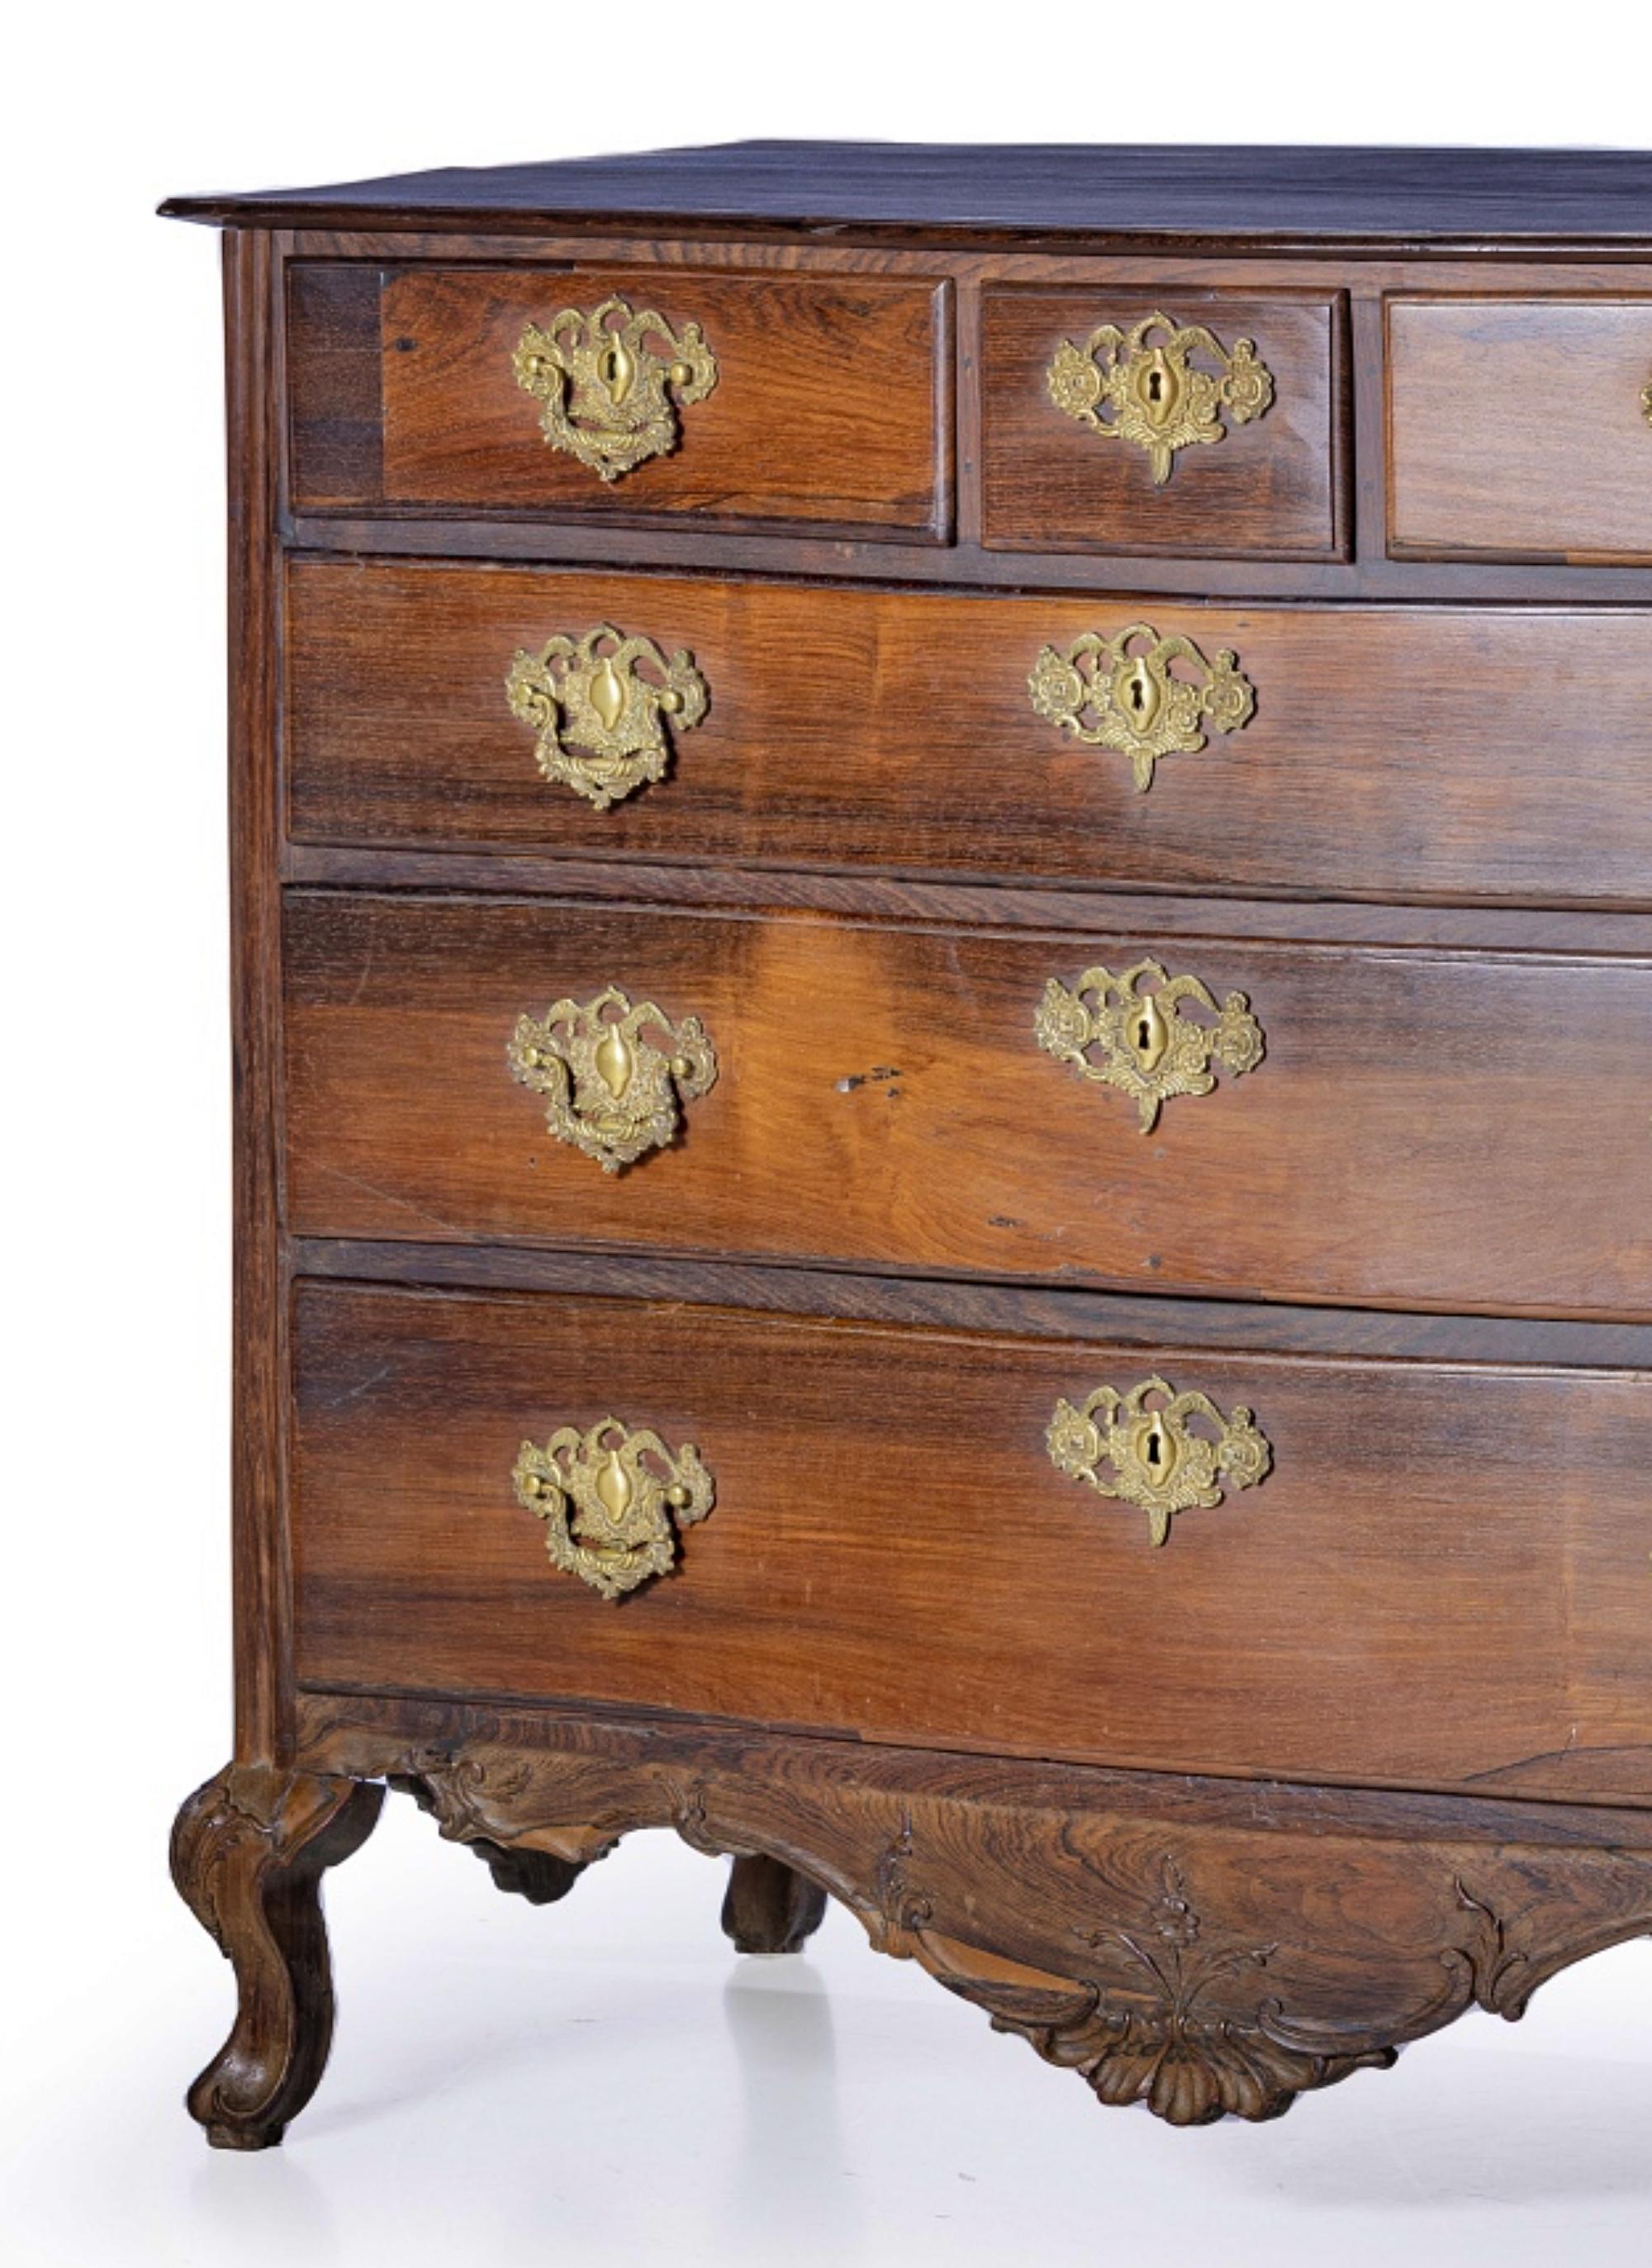 Renaissance Important Portuguese Commode 18th Century in Rosewood